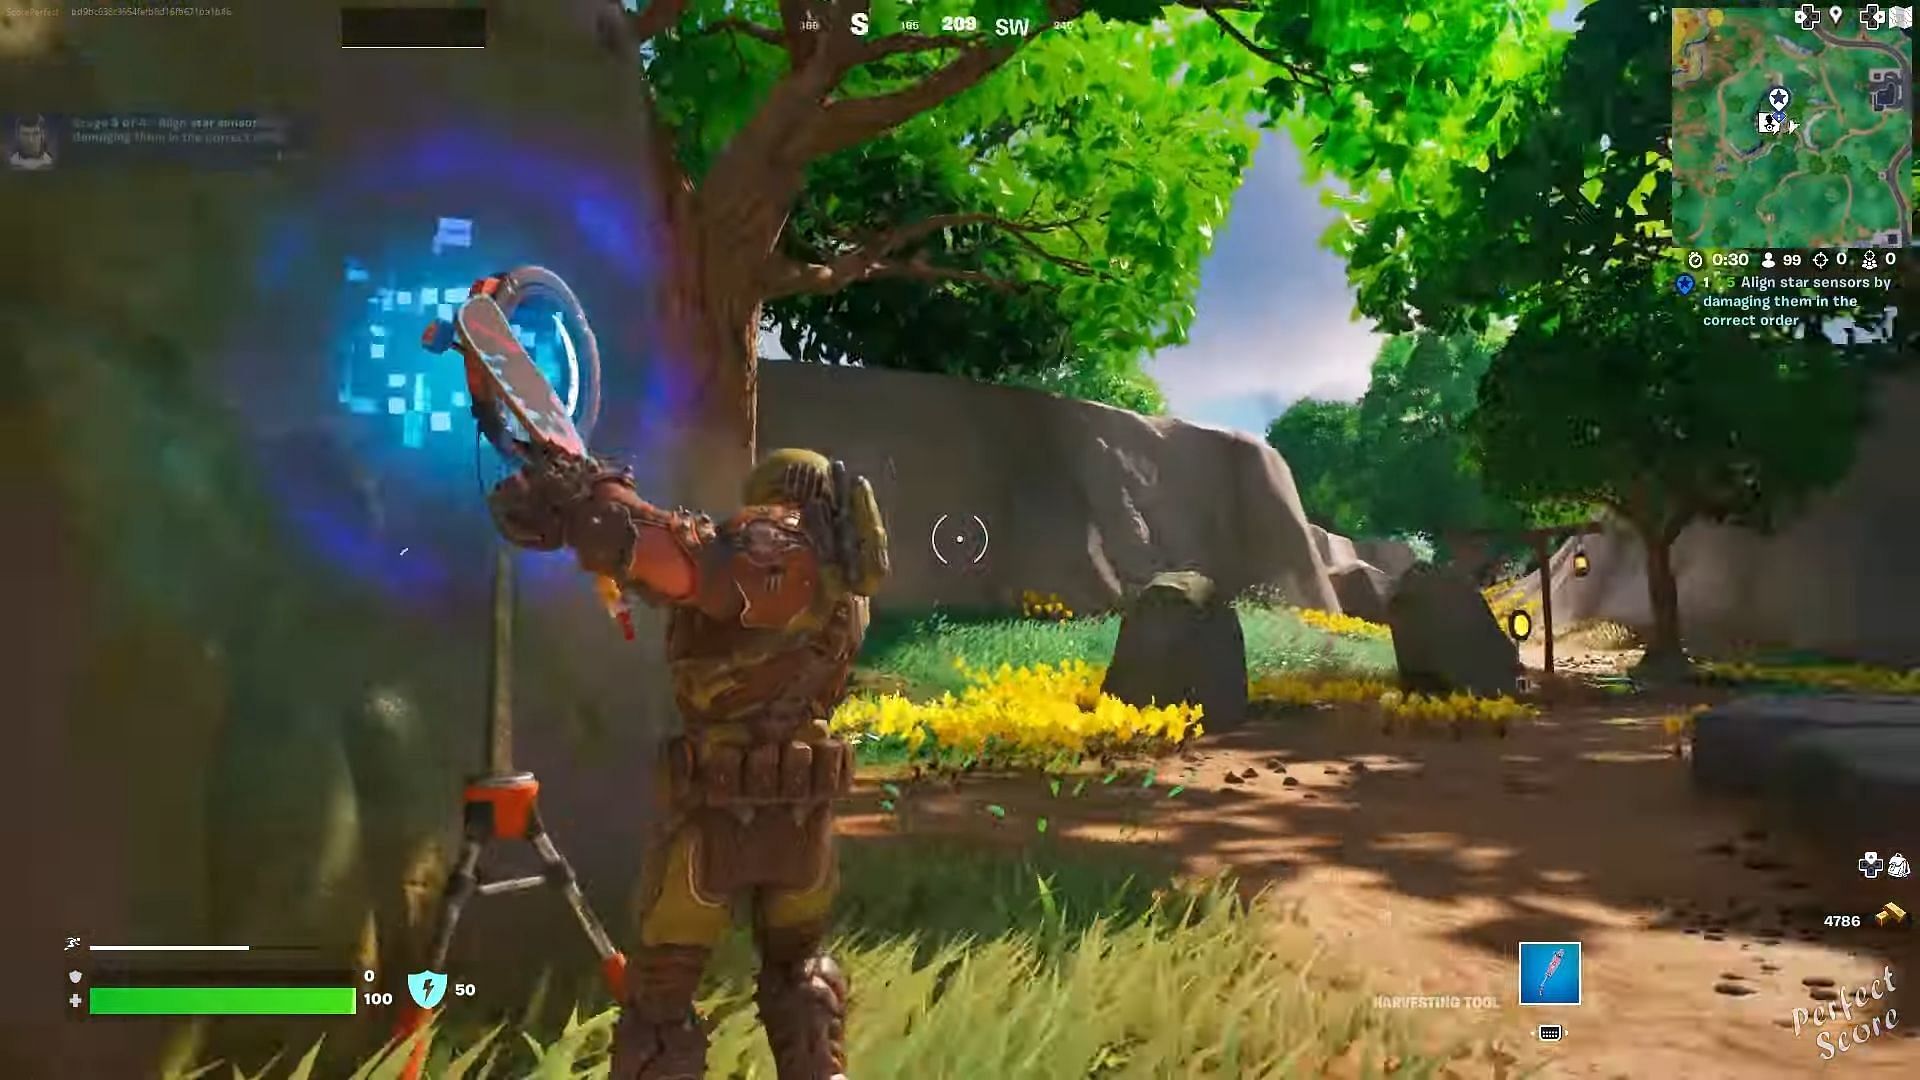 Hit the Star Sensor anywhere to complete the objective (Image via YouTube/Perfect Score)